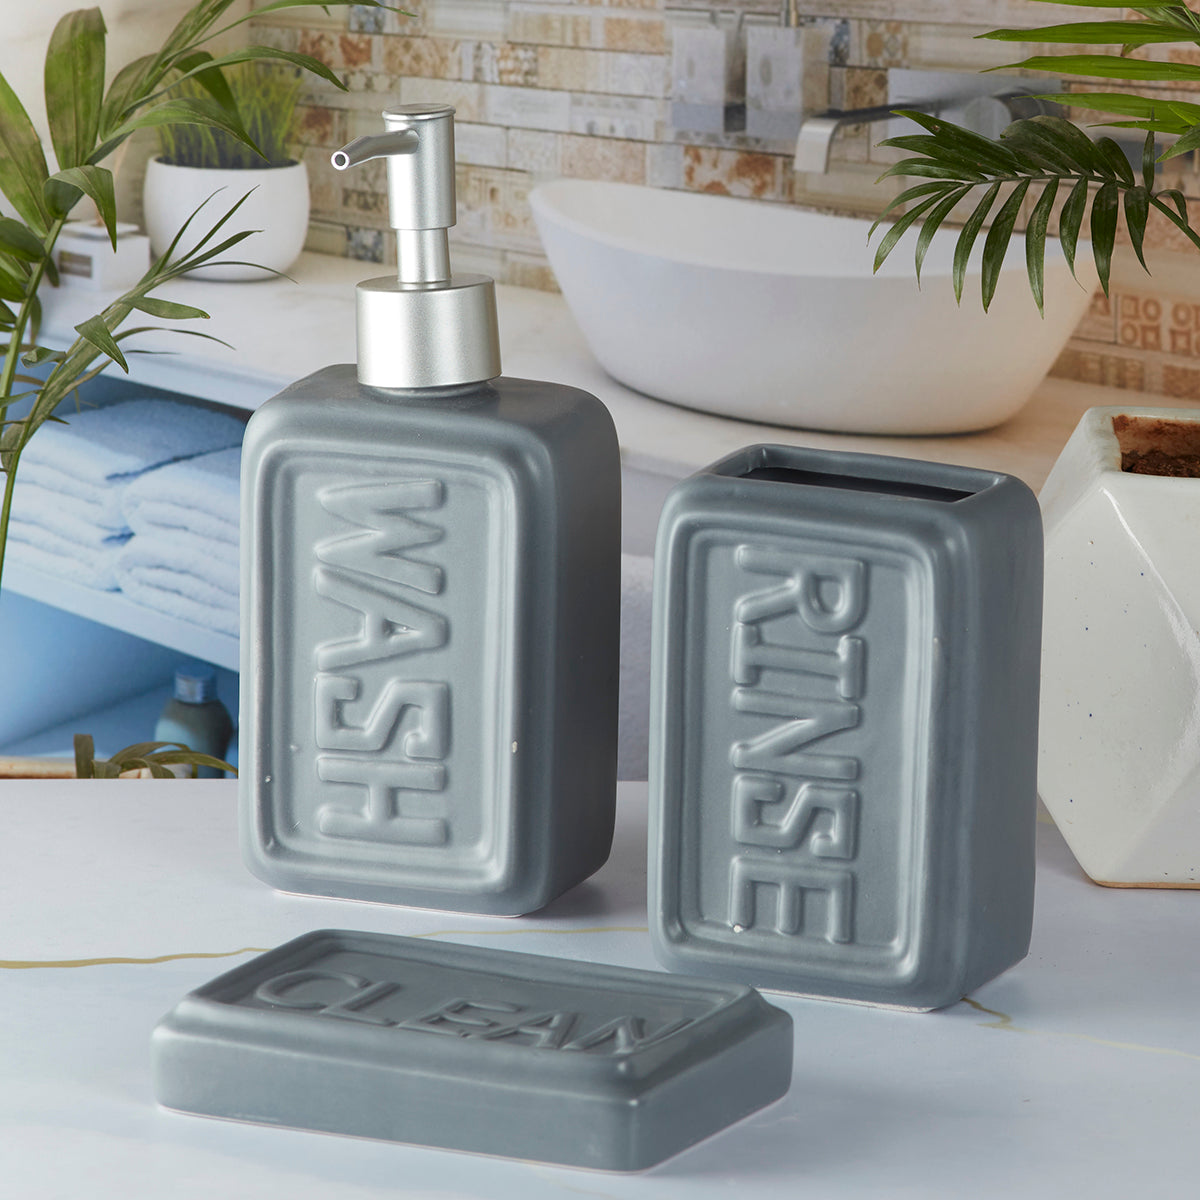 Kookee Ceramic Bathroom Accessories Set of 3, Modern Bath Set with Liquid handwash Soap Dispenser and Toothbrush holder, Luxury Gift Accessory for Home, Grey (9893)